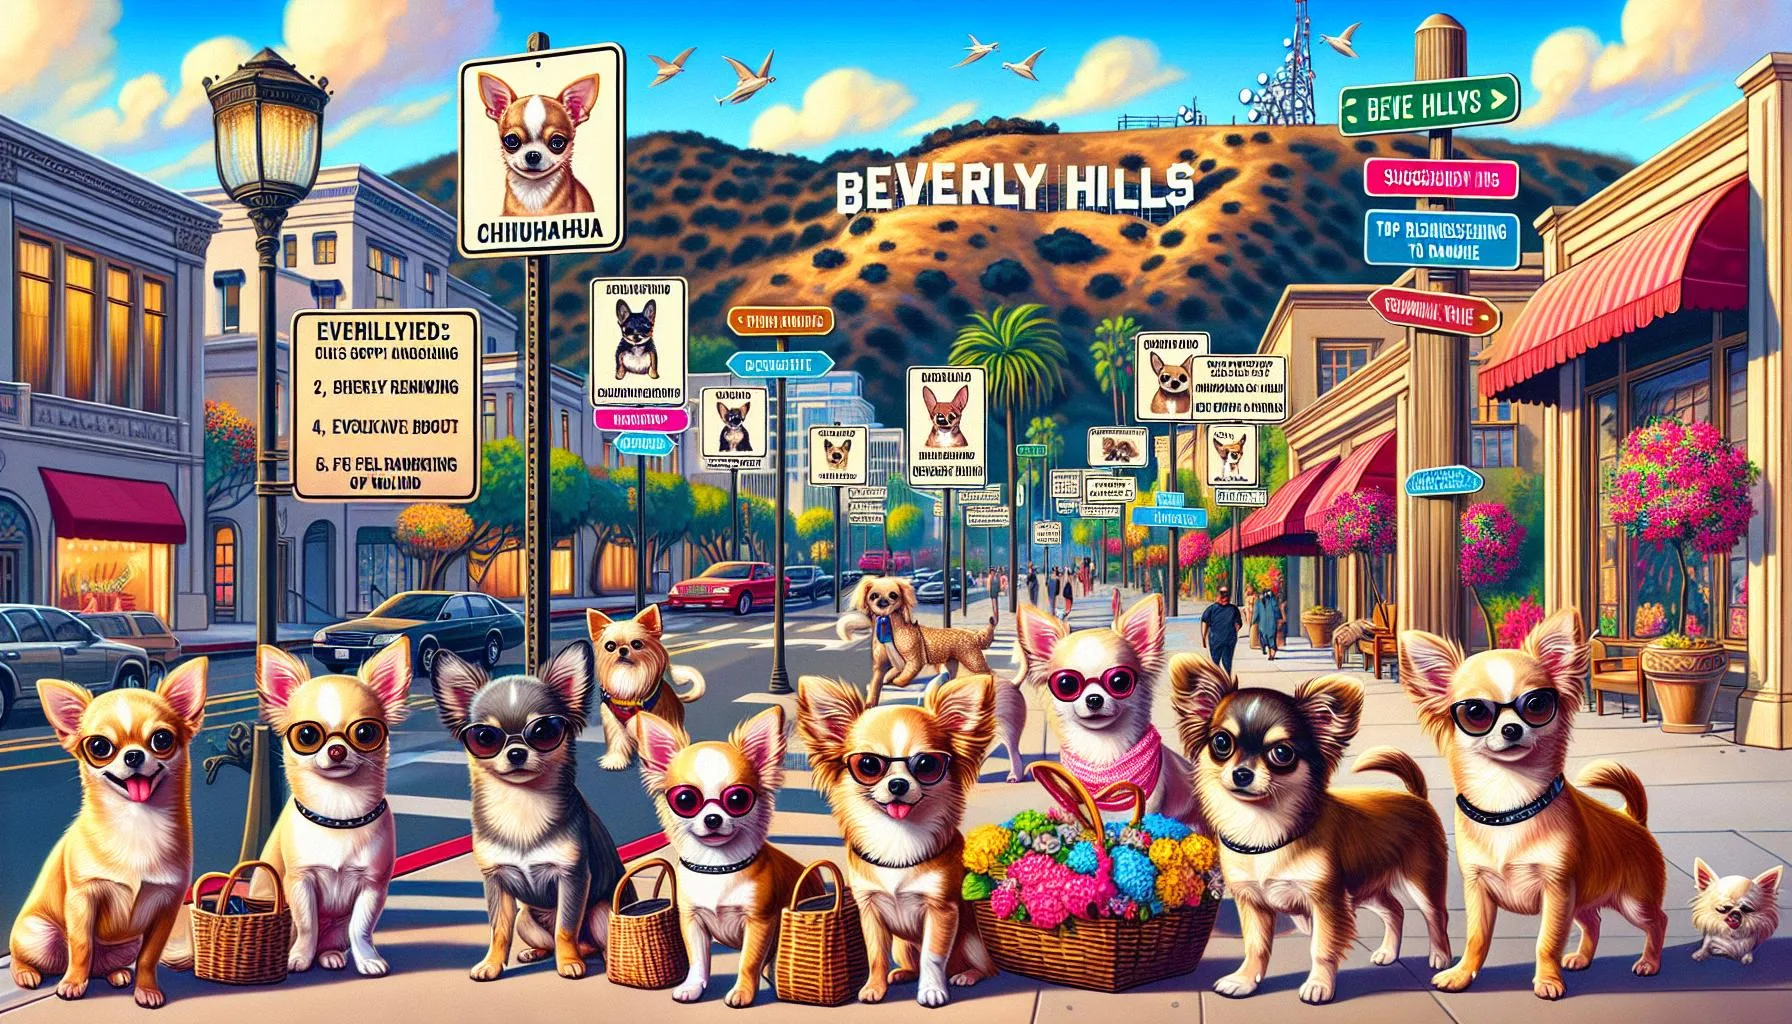 Top 10 Beverly Hills Chihuahua Names: Choose Yours!